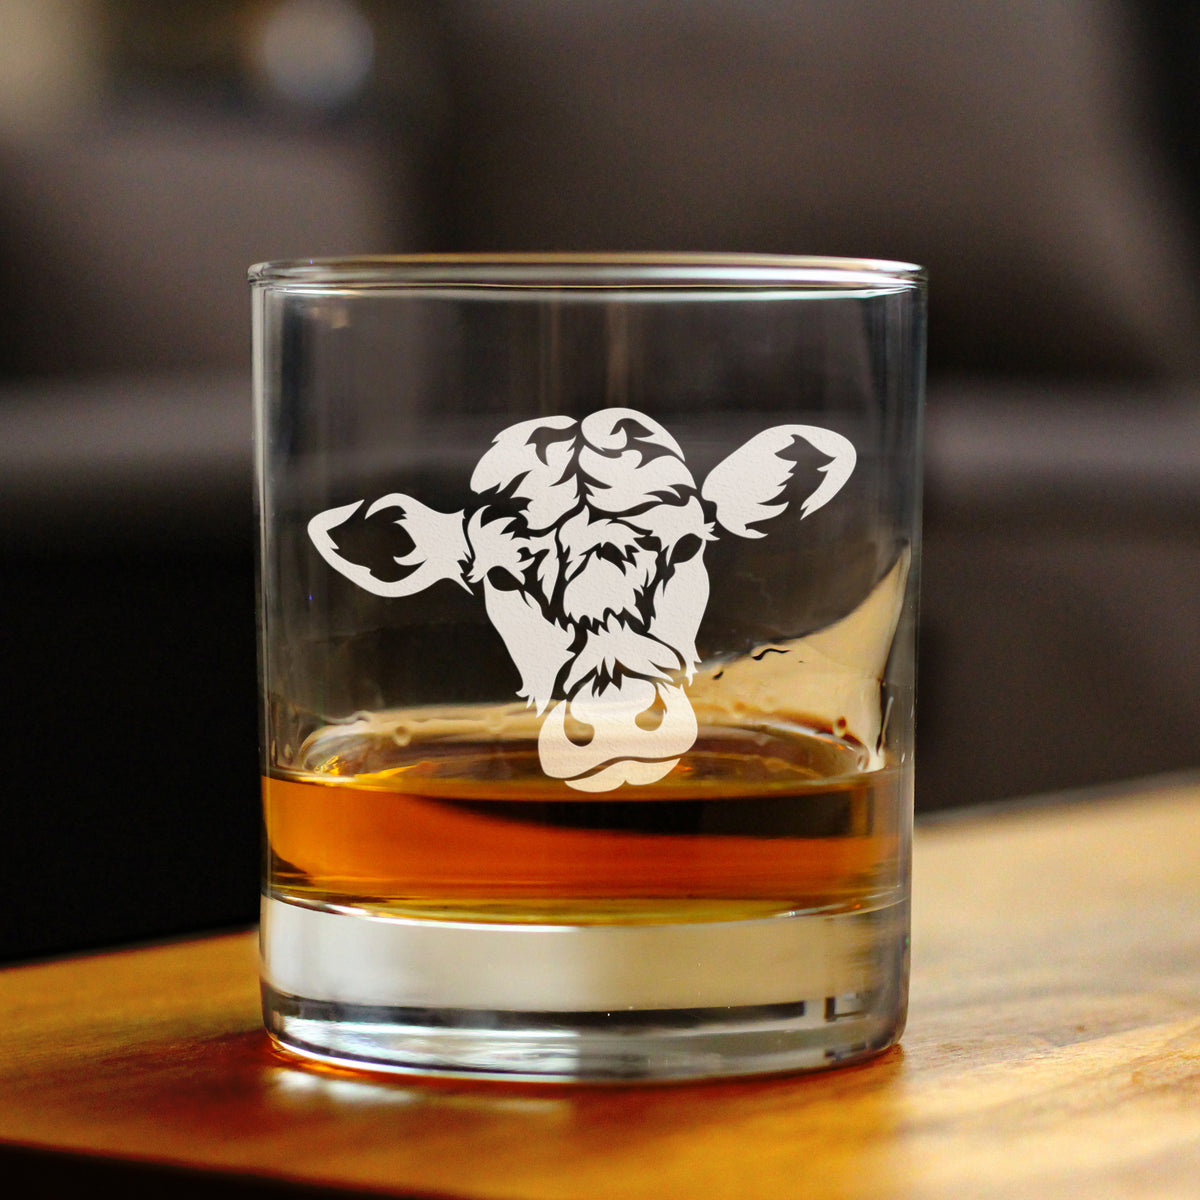 Cow Face Whiskey Rocks Glass - Funny Unique Farm Animal Themed Decor and Gifts for Cow Lovers - 10.25 Oz